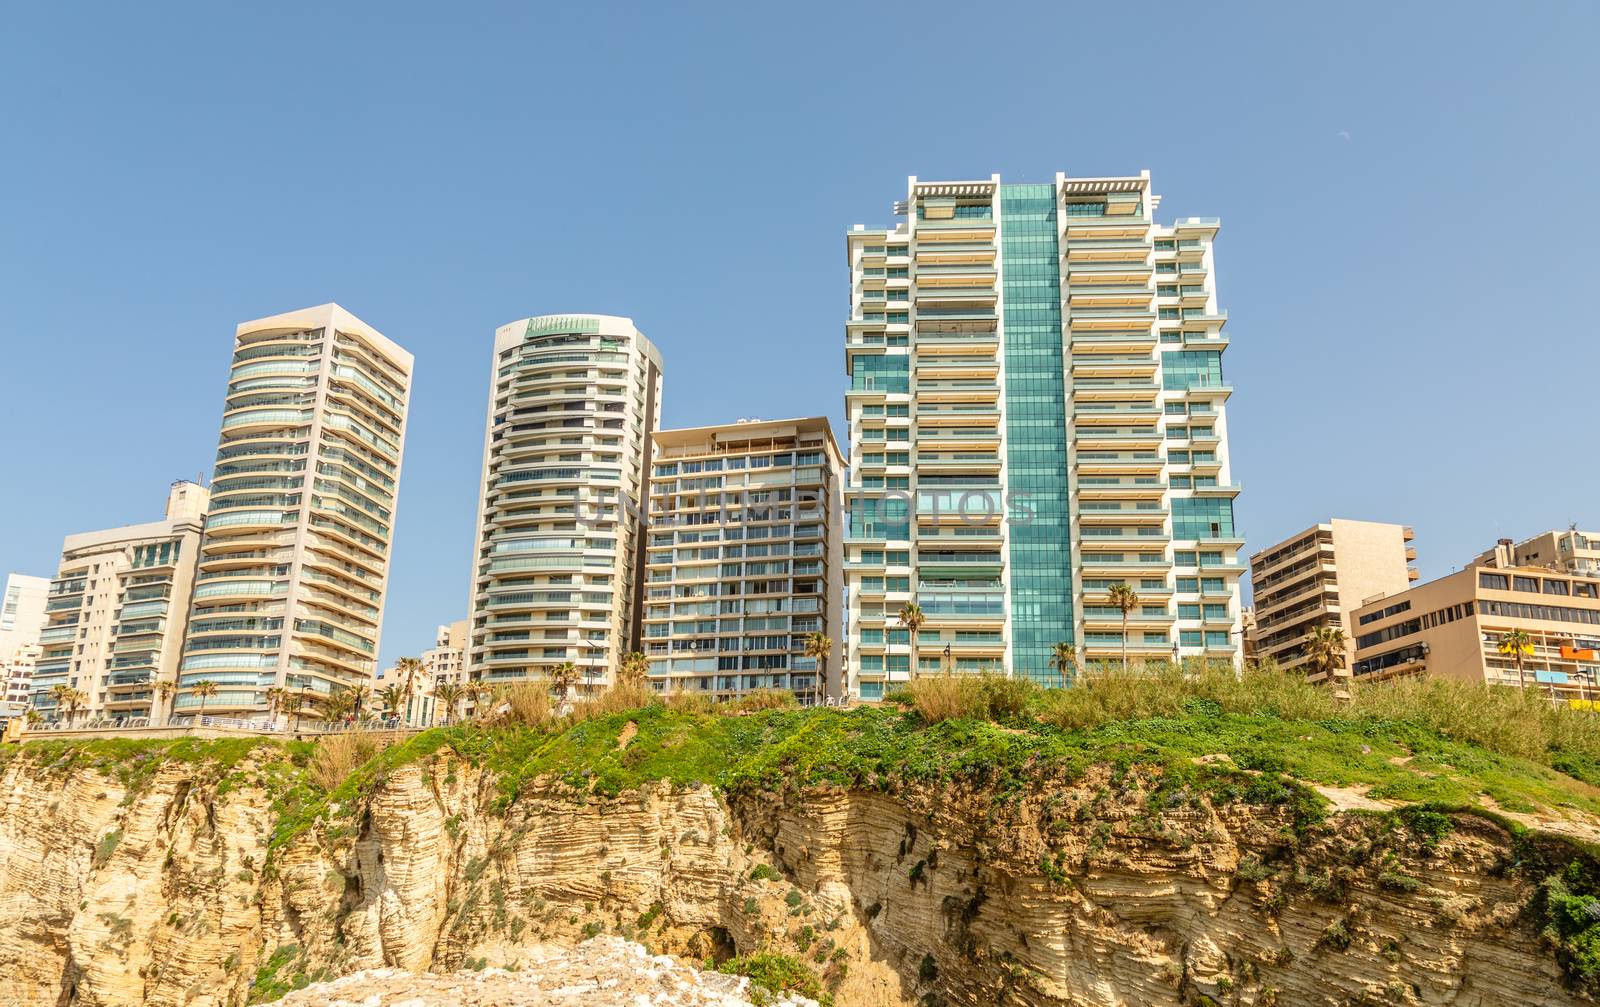 Beirut city living blocks and buildings , Beirut, Lebanon  by ambeon